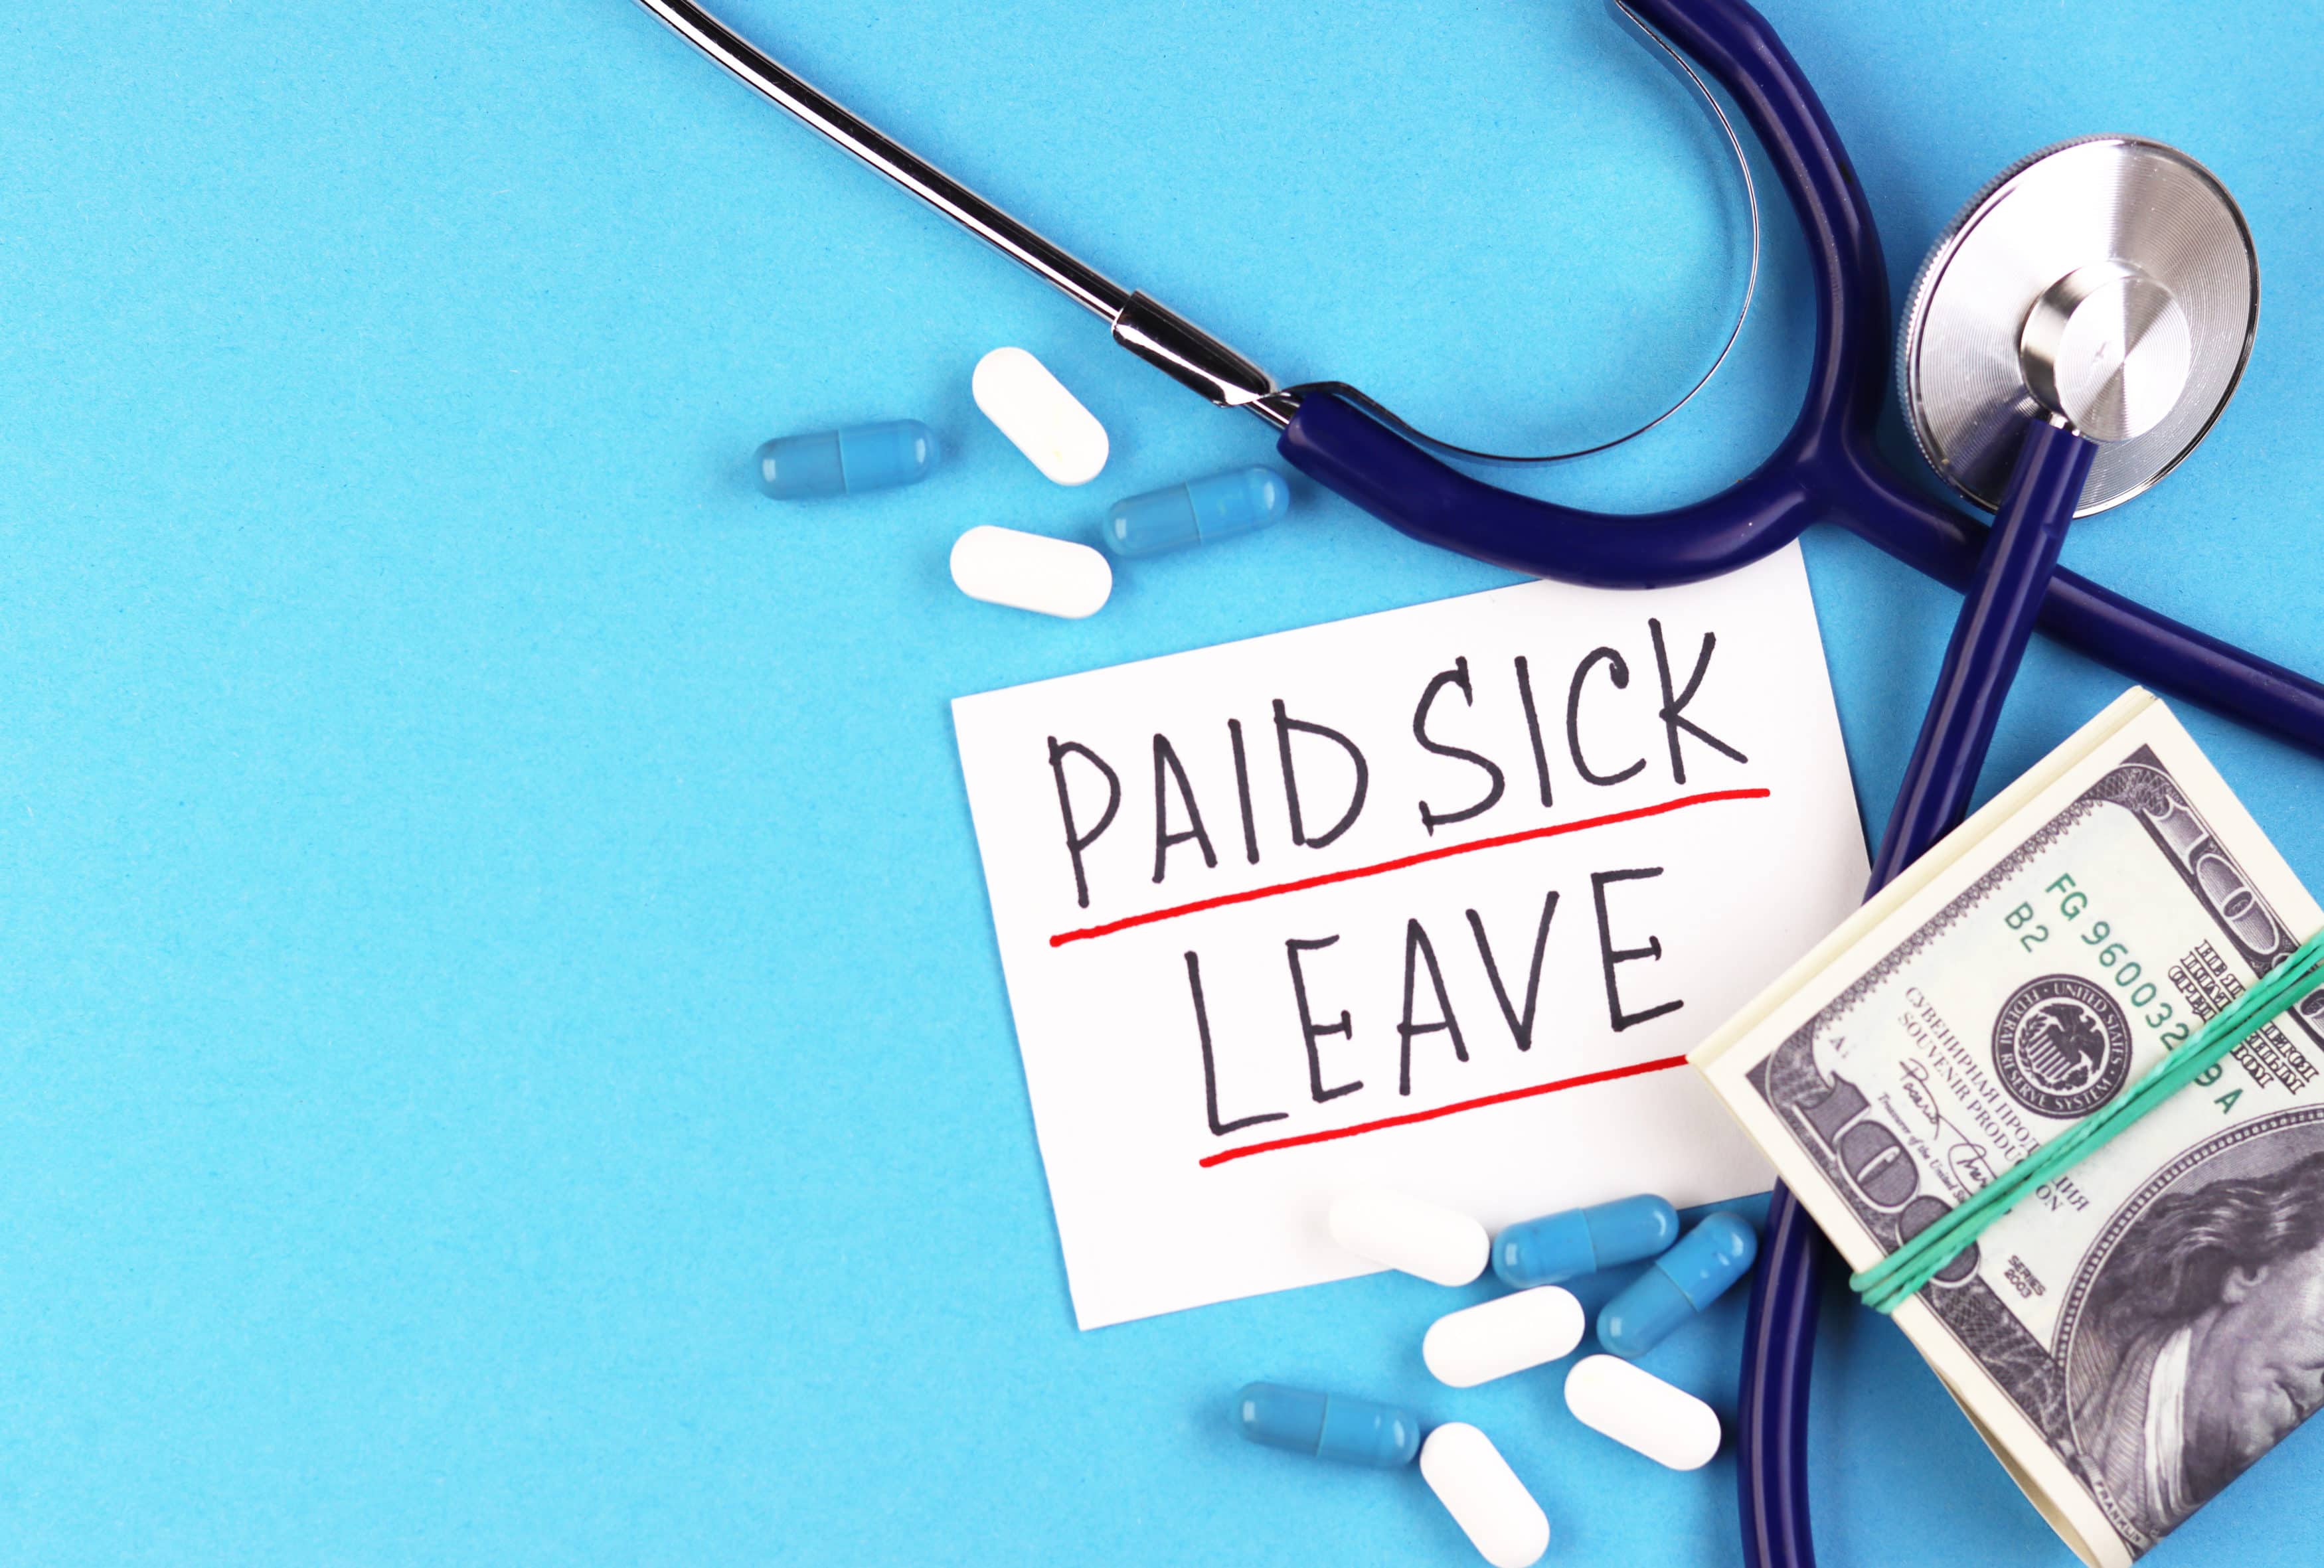 phonendoscope, money and the text paid sick leave on a blue background